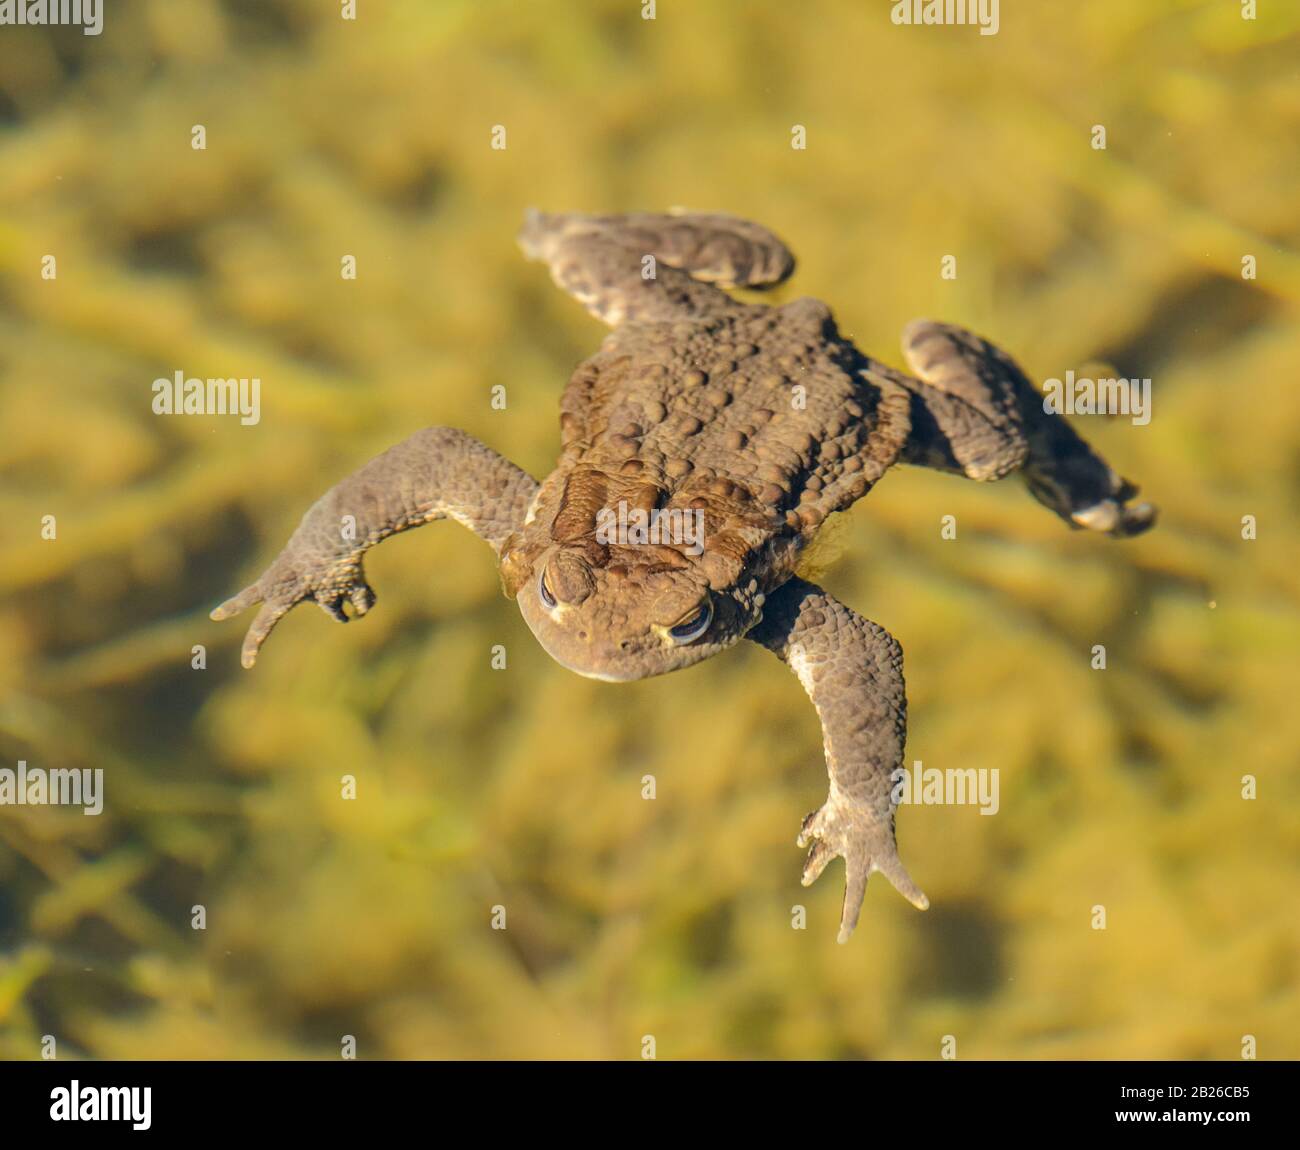 toad frog swimming in clear water, wild Stock Photo